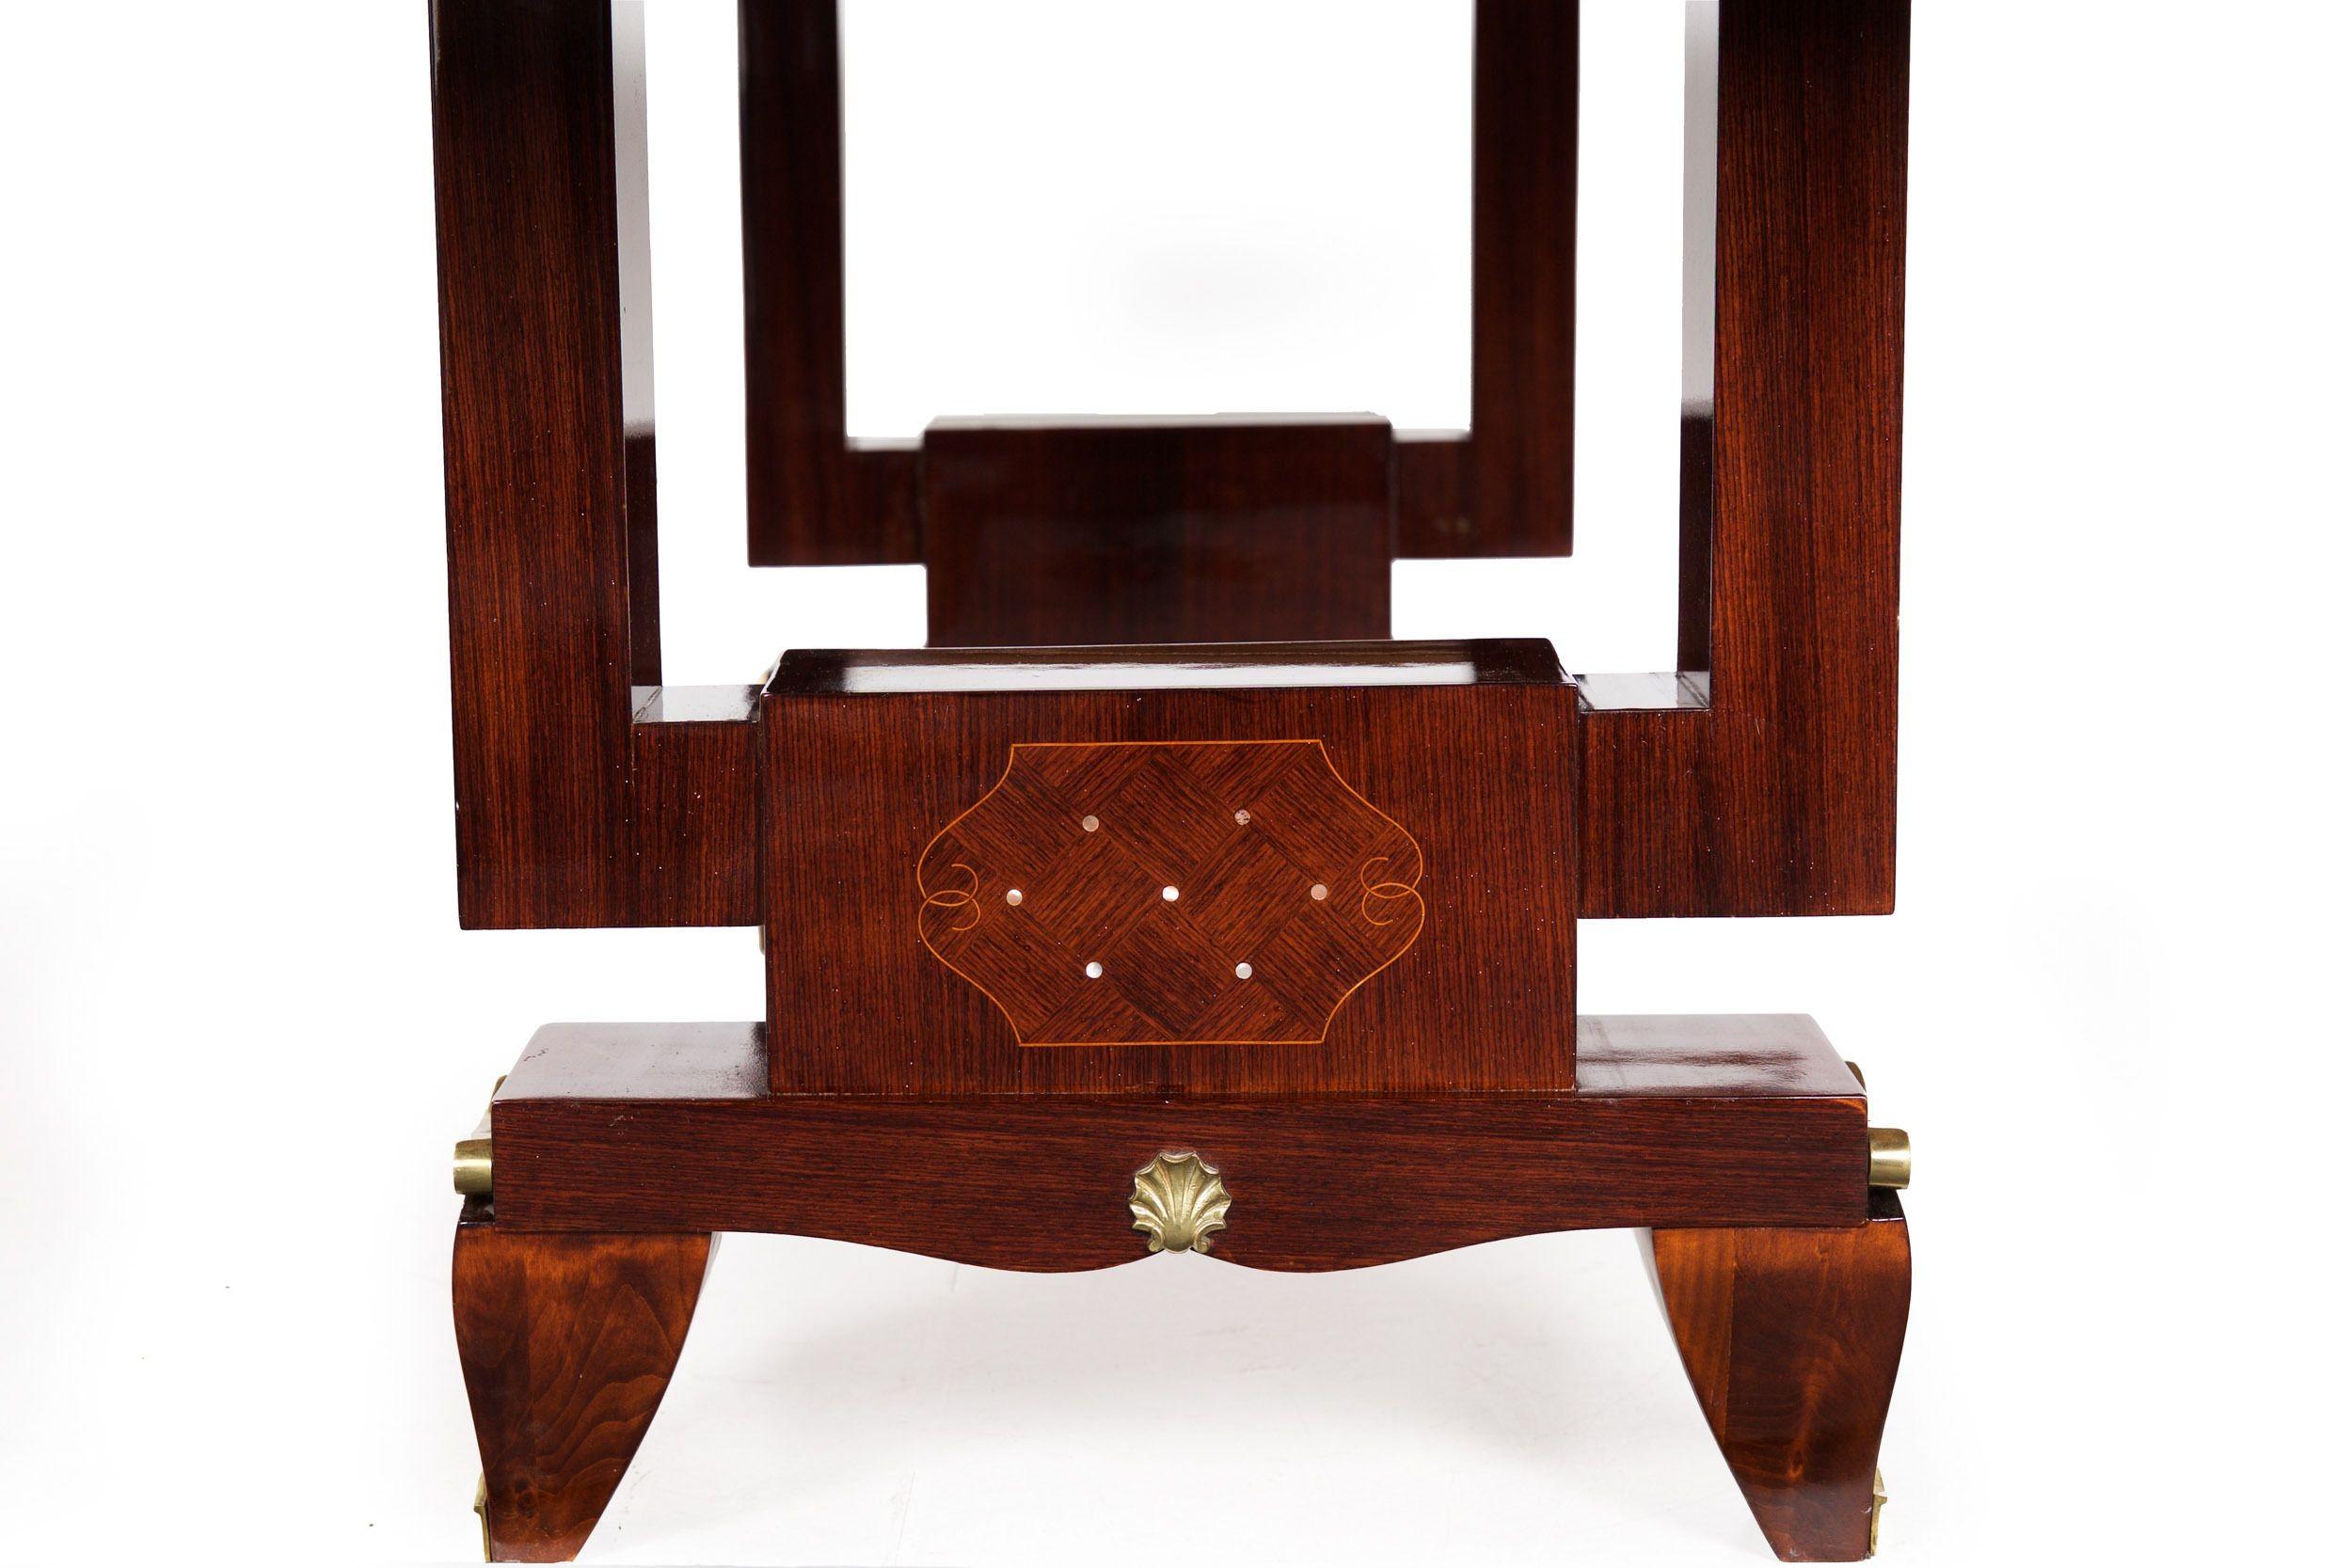 French Art Deco Inlaid Mother-of-Pearl Rosewood Dining Table, circa 1940s For Sale 6